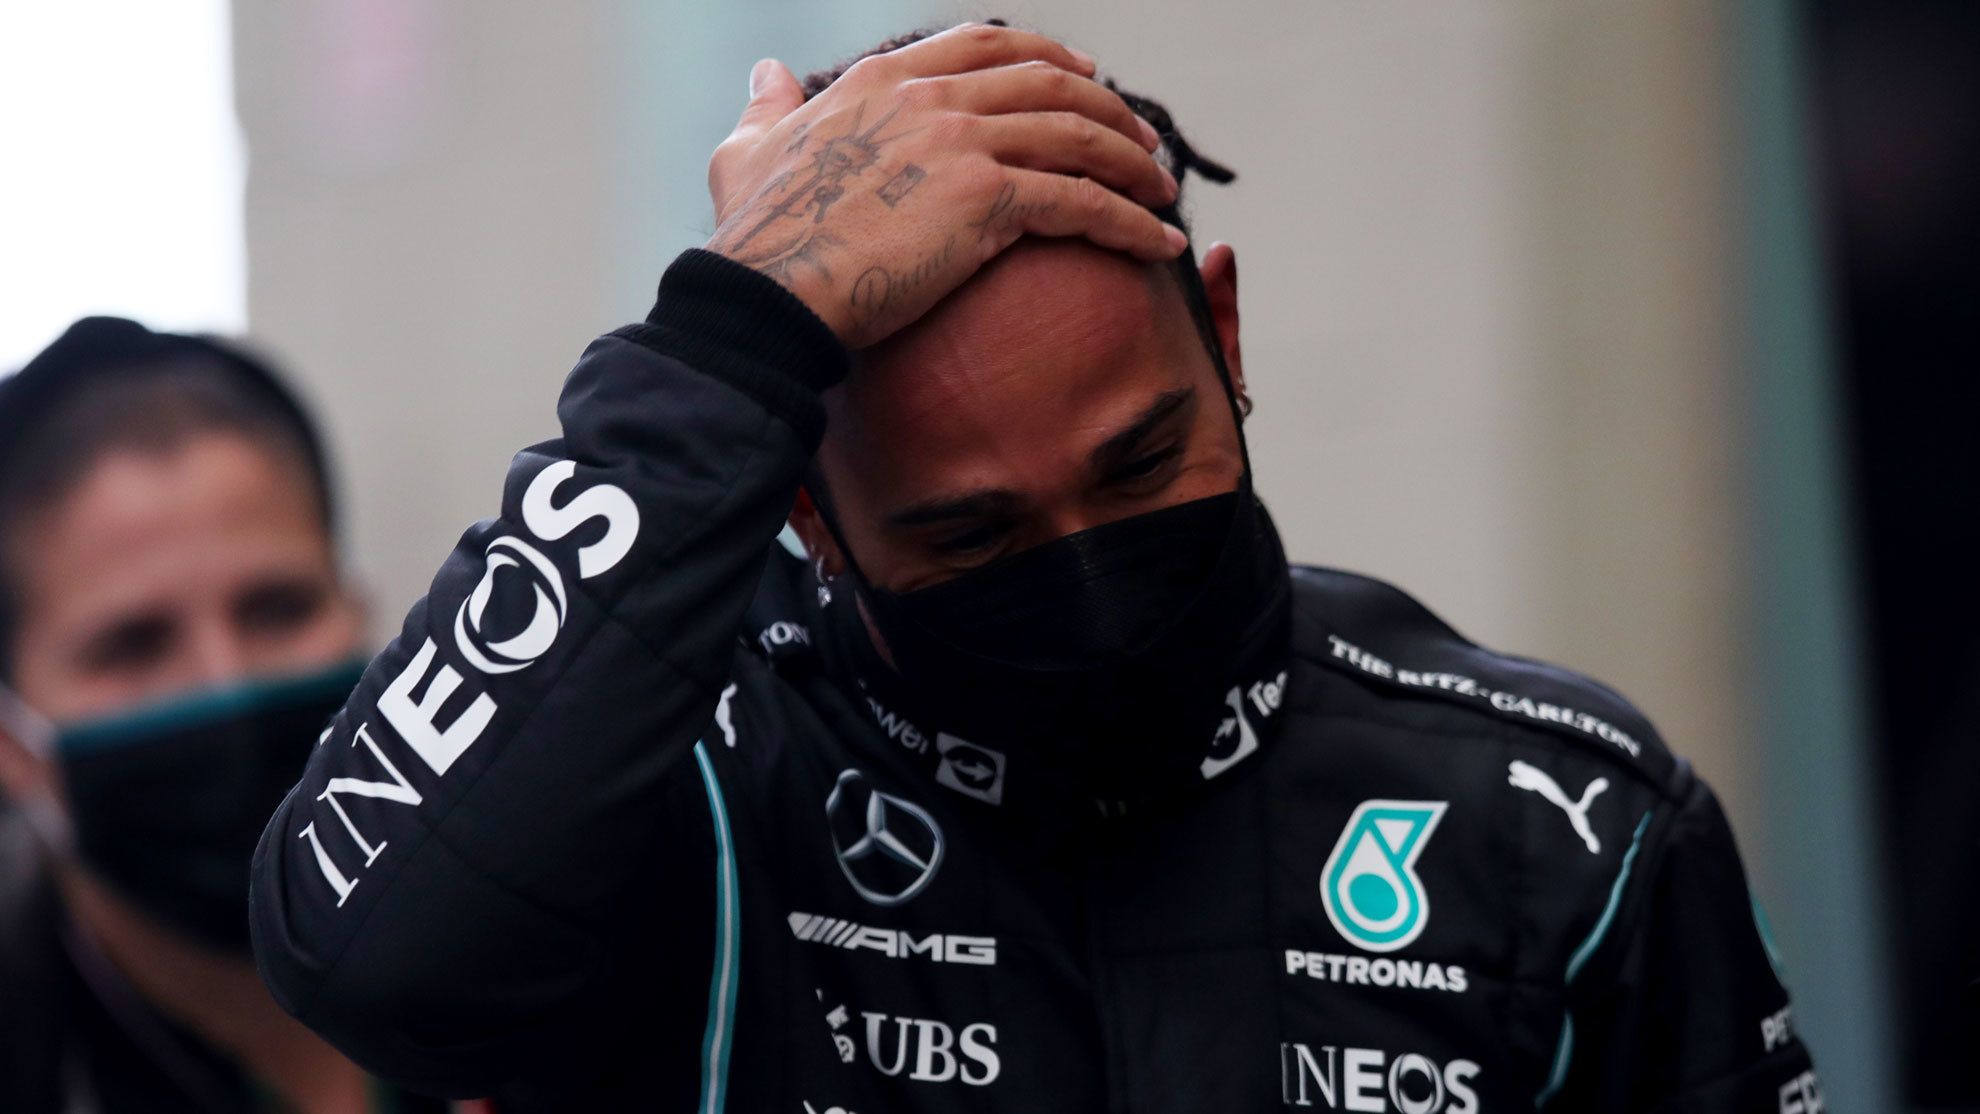 Lewis Hamilton disqualified from Sao Paulo GP Qualifying after DRS infringement